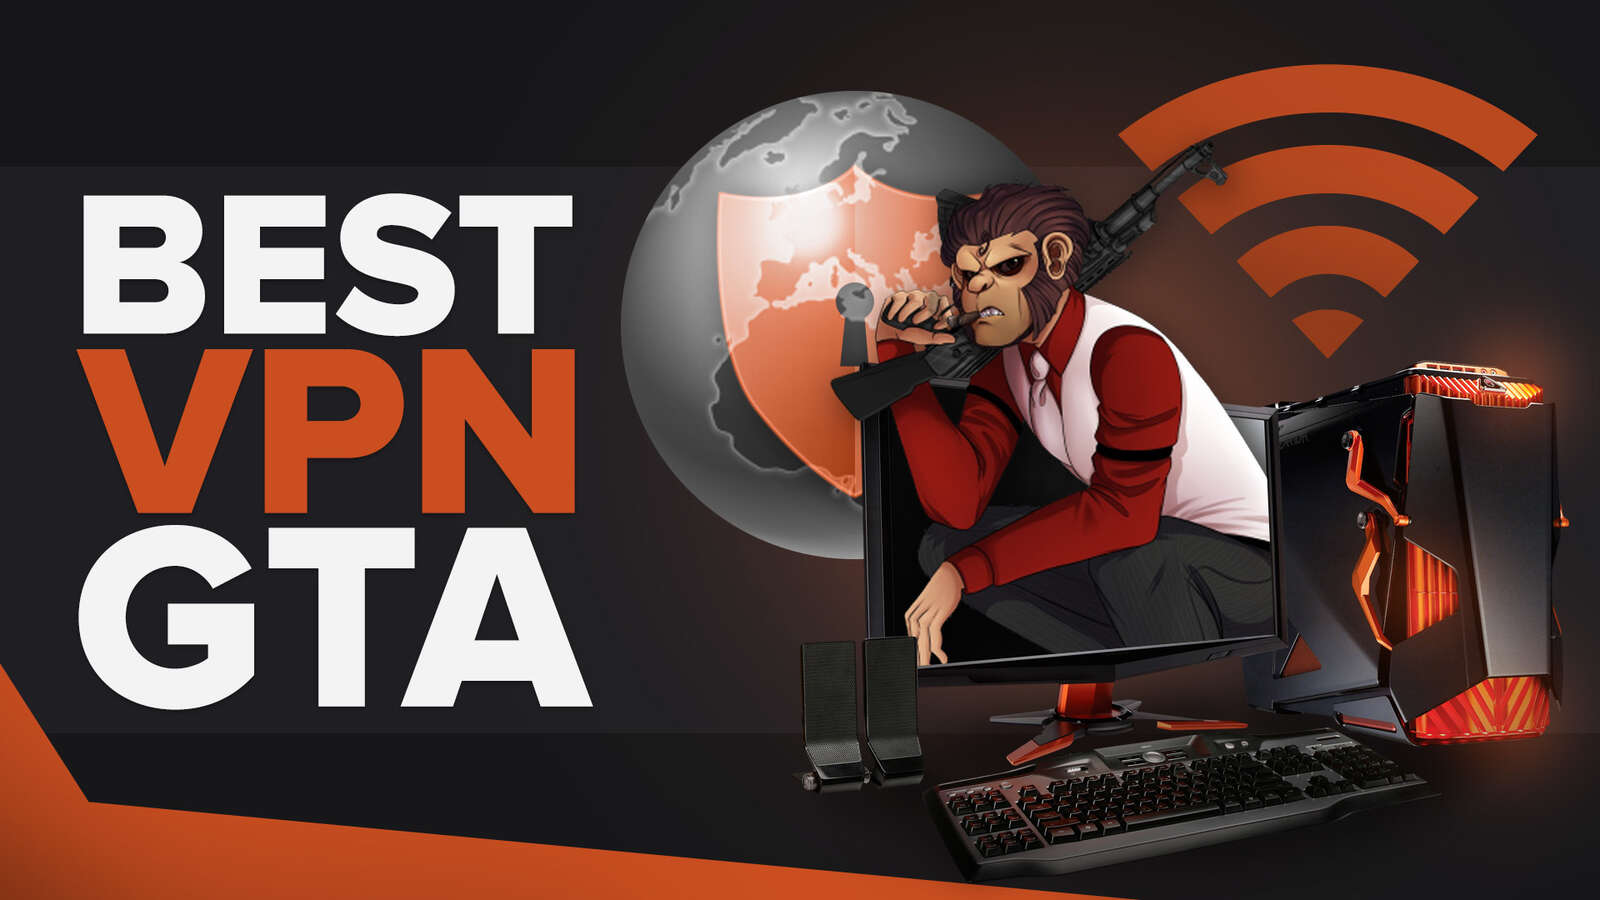 The Best VPN for Grand Theft Auto [Top 5 List]